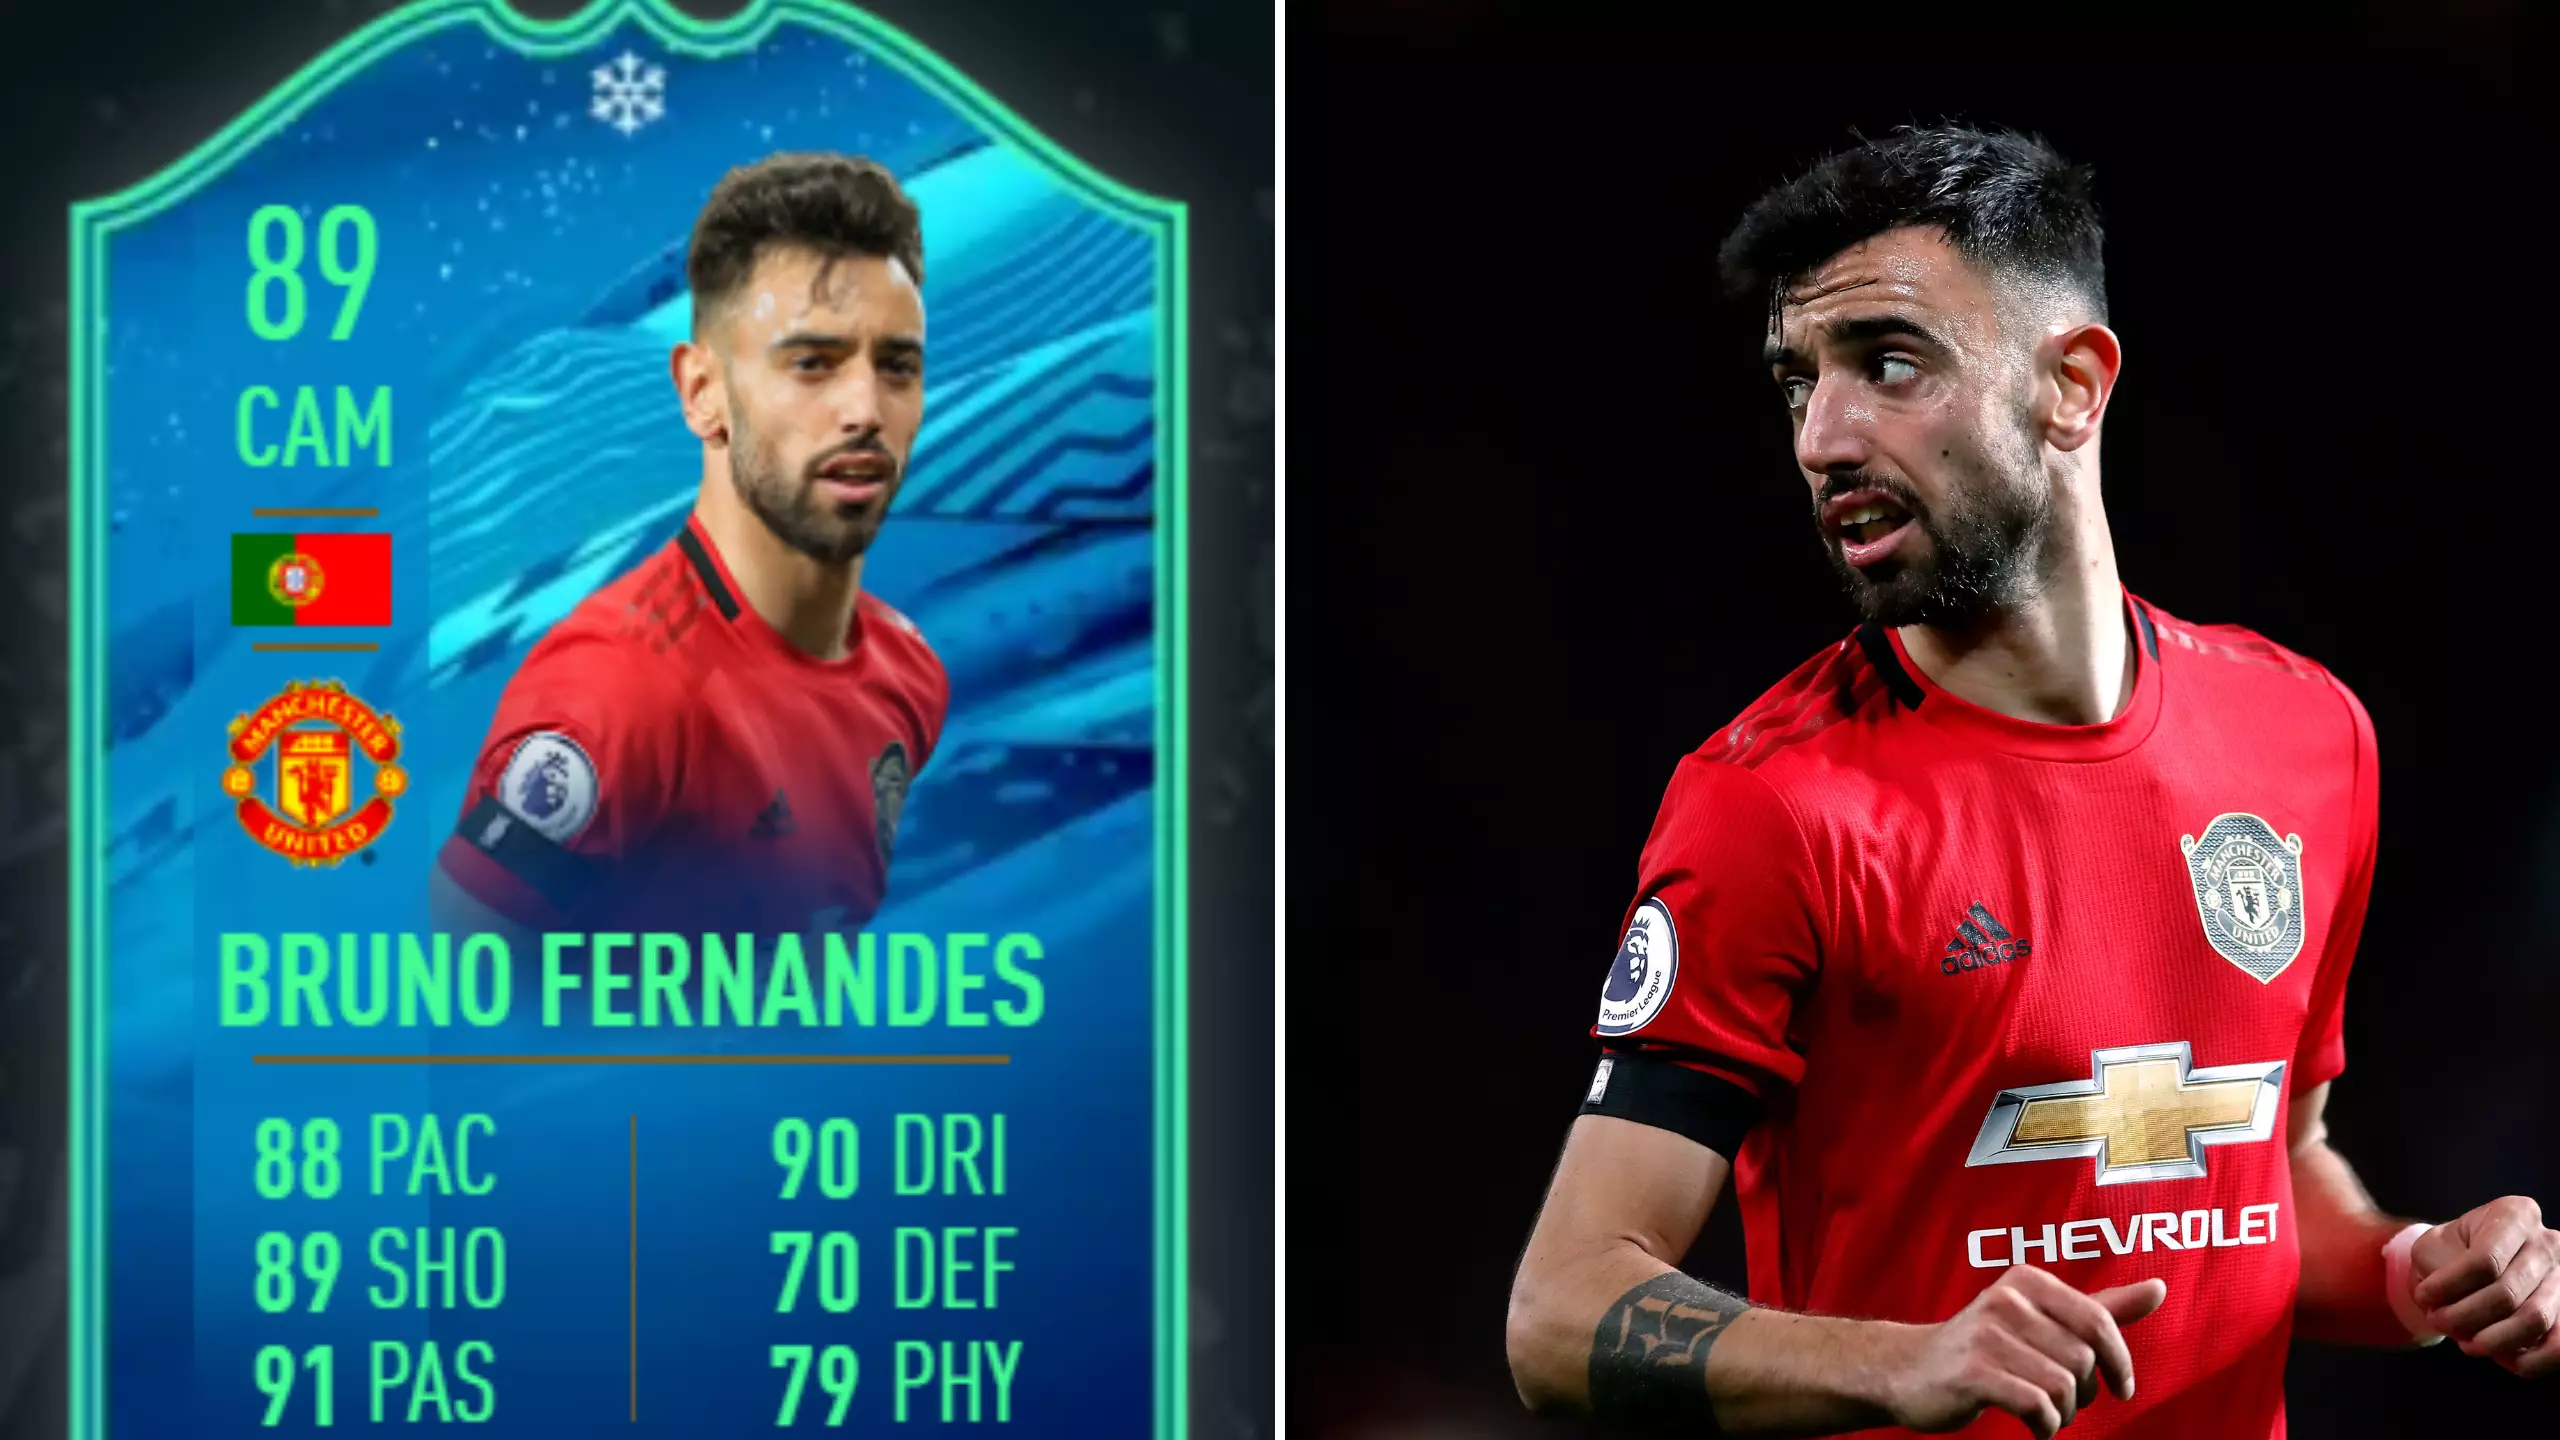 Bruno Fernandes' New FIFA 20 Card Makes Him One Of The Best Midfielders In The Game